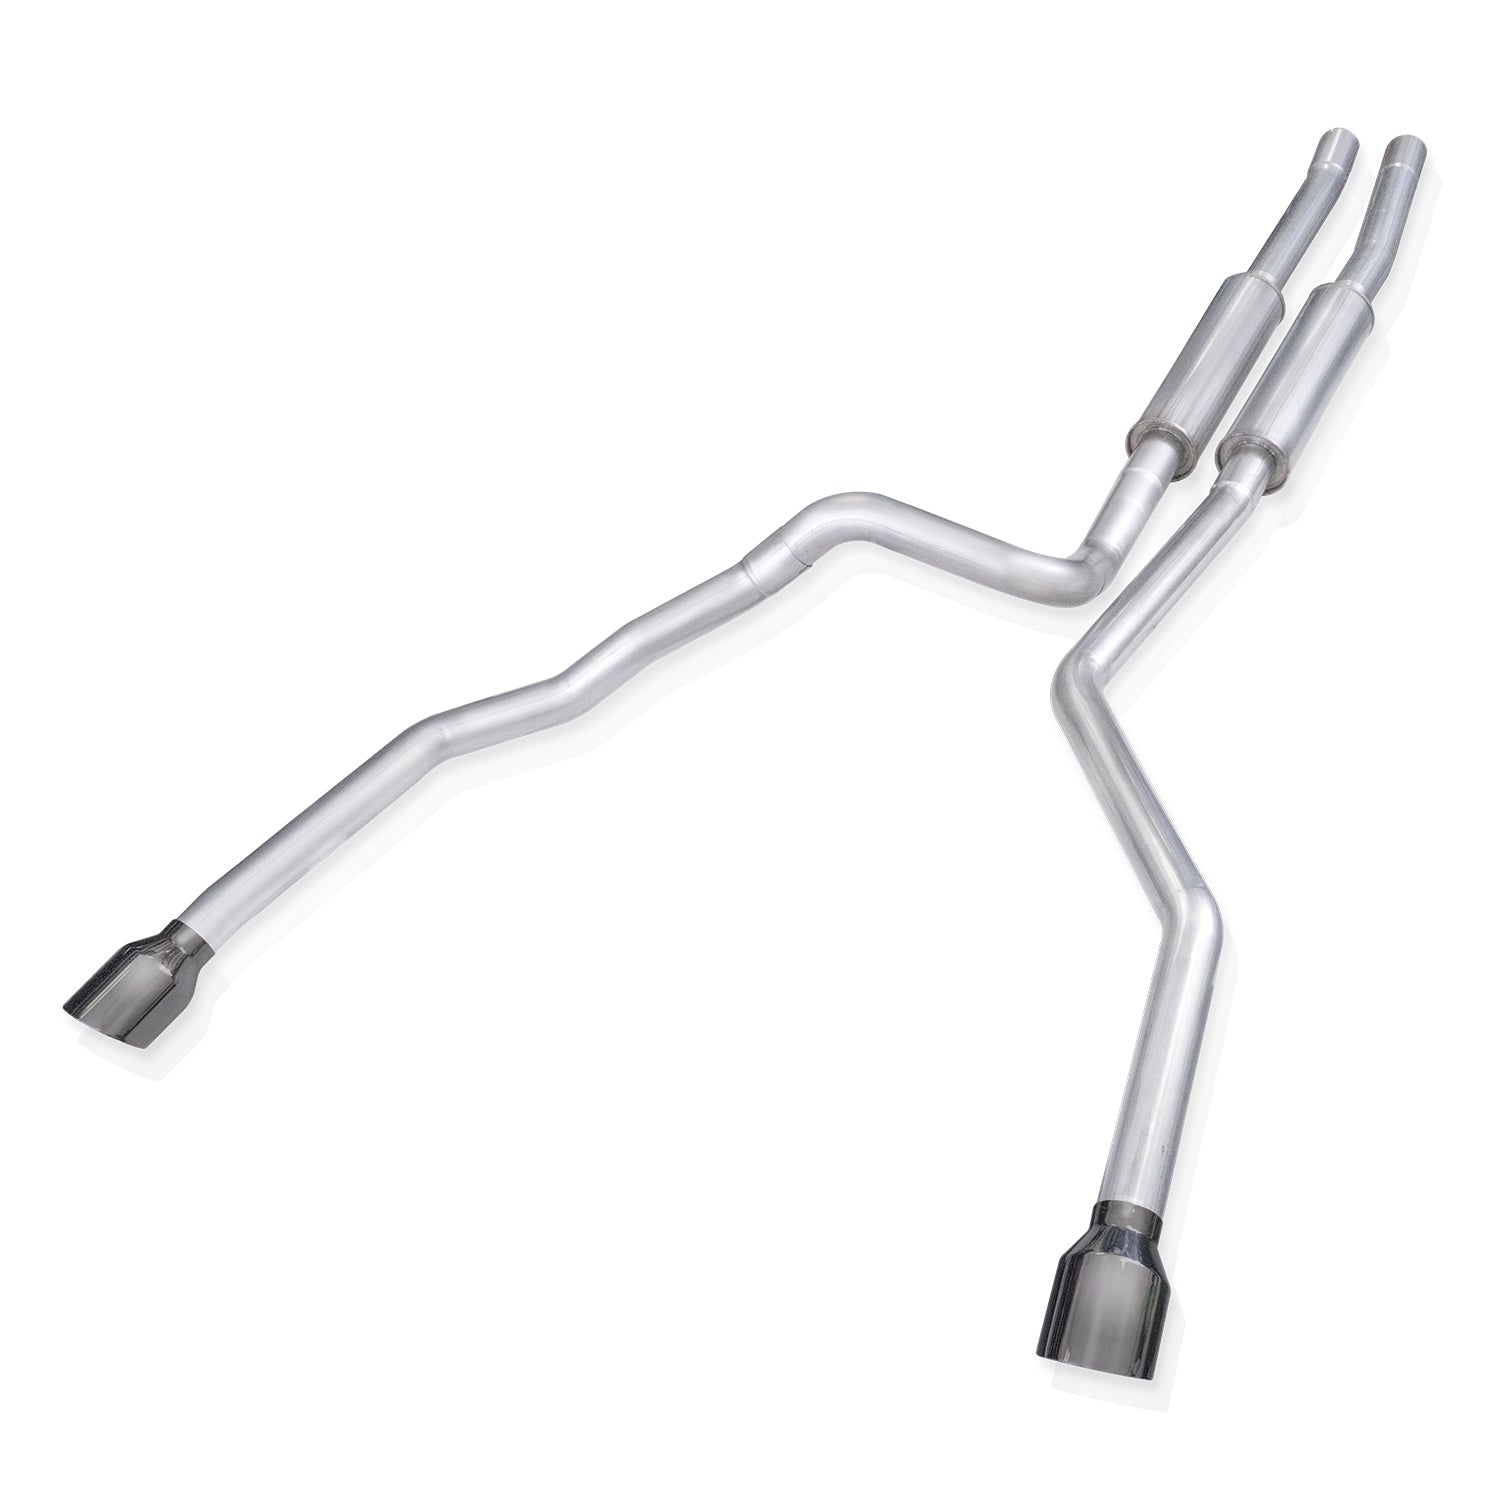 '21-23 Ram TRX 6.2L  Catback Exhaust & Long Tube Header Combo Kit Stainless Works individual display